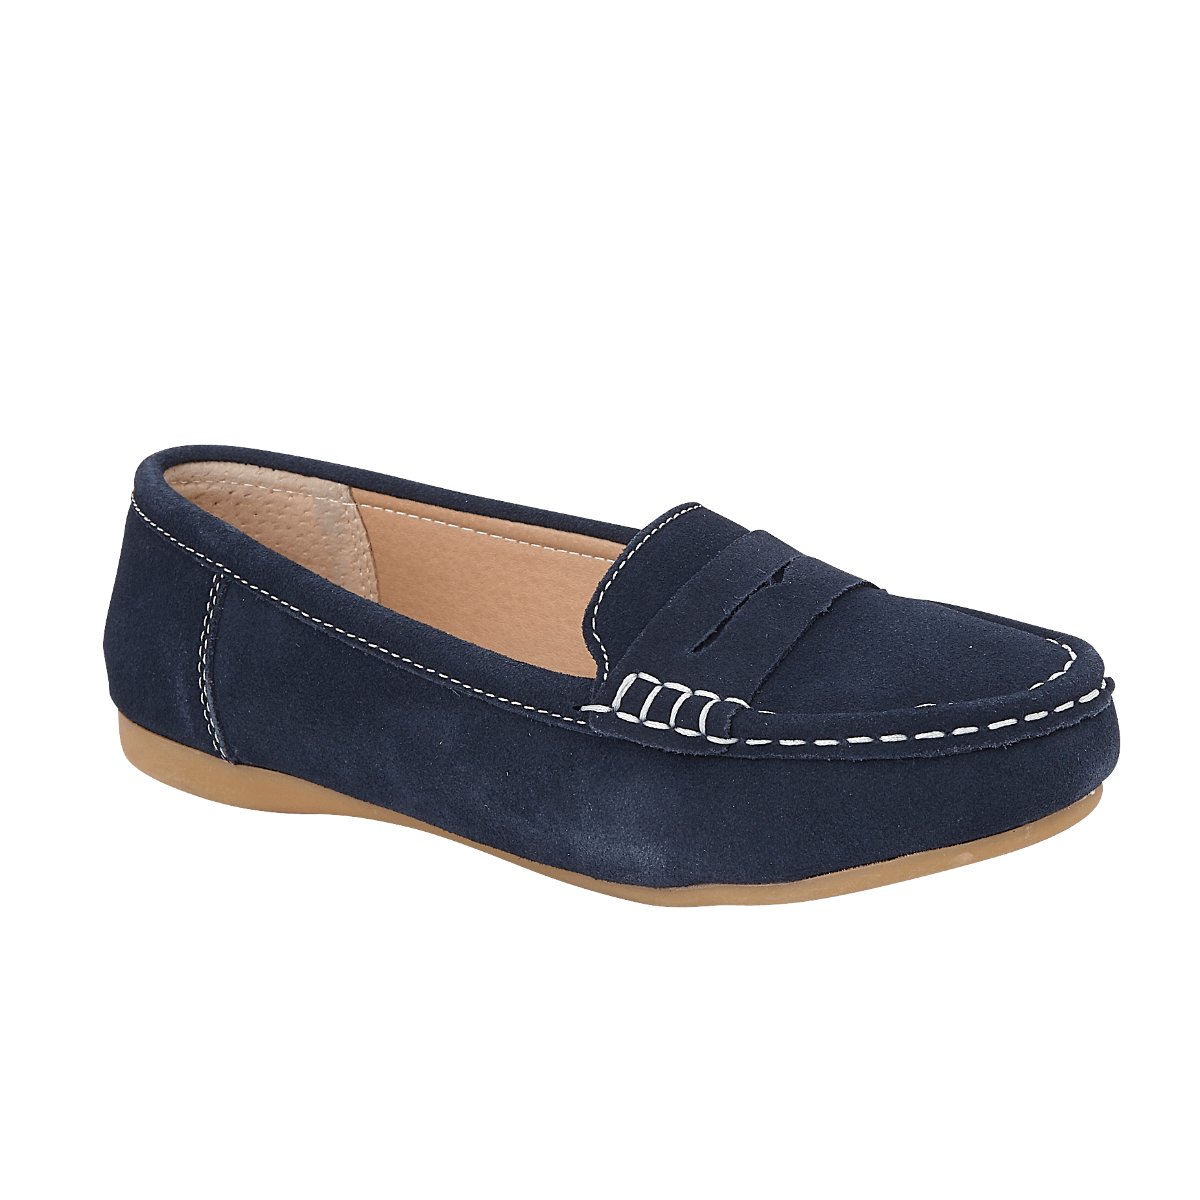 Monaco Real Suede Loafer - Navy